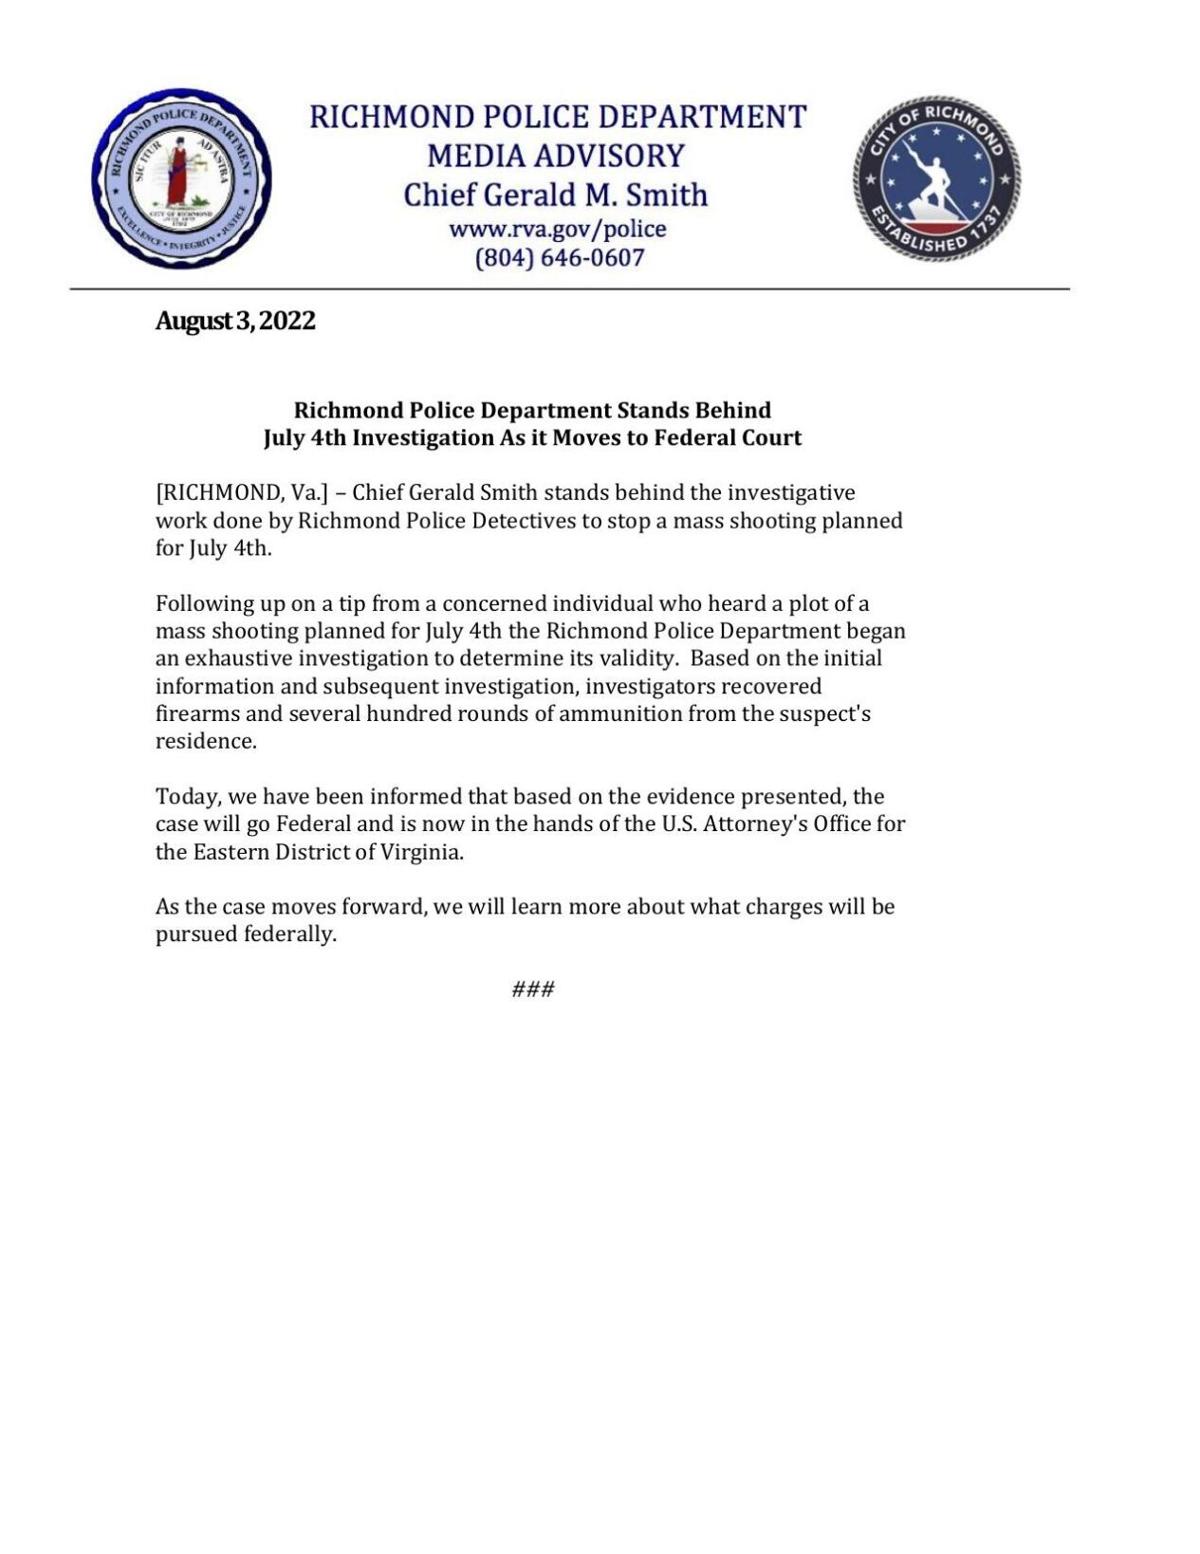 Read the statement from Richmond police